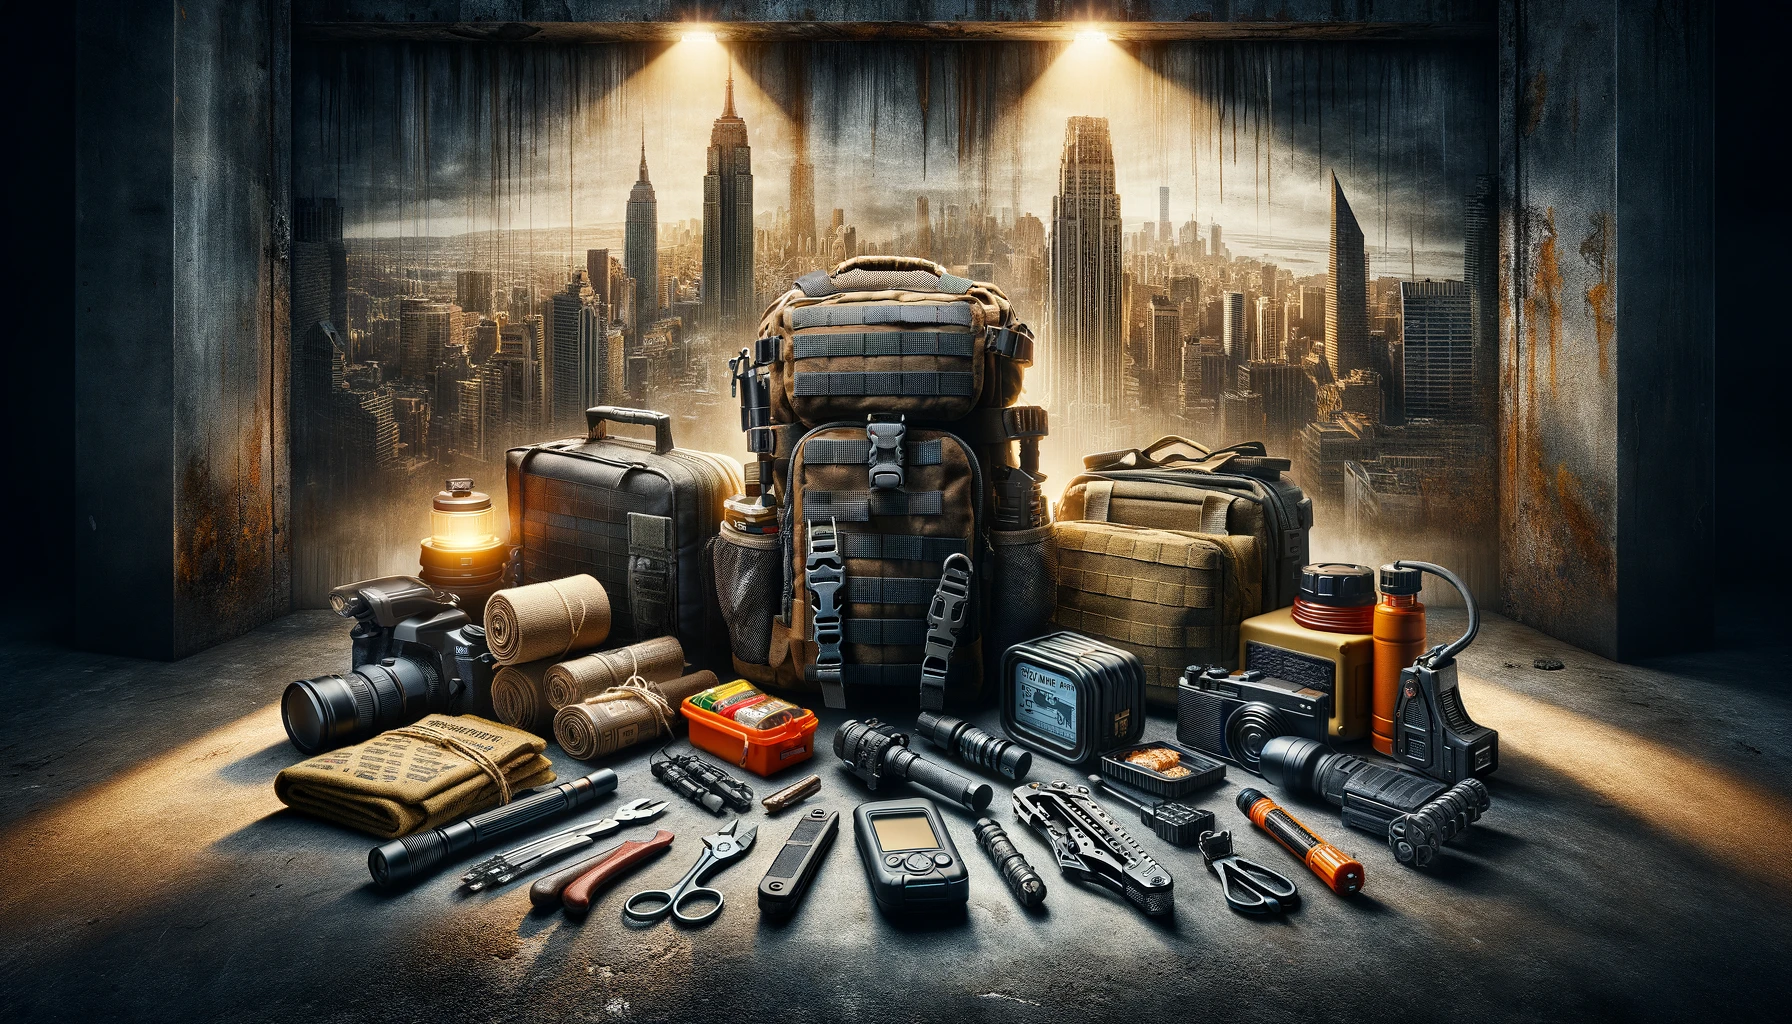 Essential urban survival kit items dramatically arranged on a gritty, urban-themed backdrop, highlighting a durable backpack, multitool, first-aid kit, water purifier, food rations, solar flashlight, and radio, emphasizing readiness for urban survival